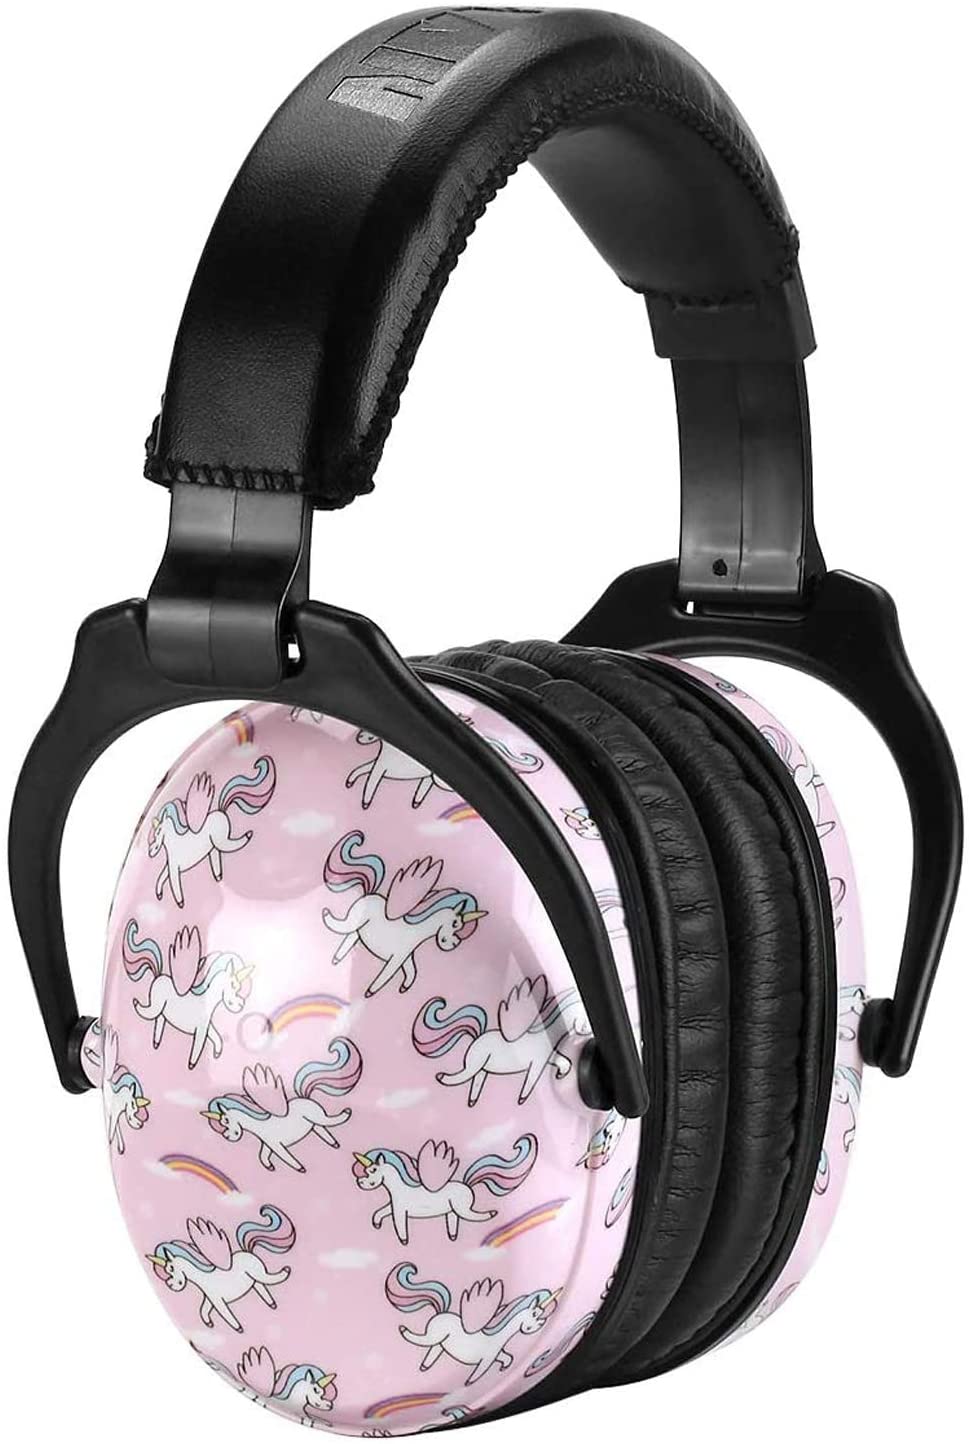 A pair of noise protection earmuffs that are light pink and have unicorns illustrations.